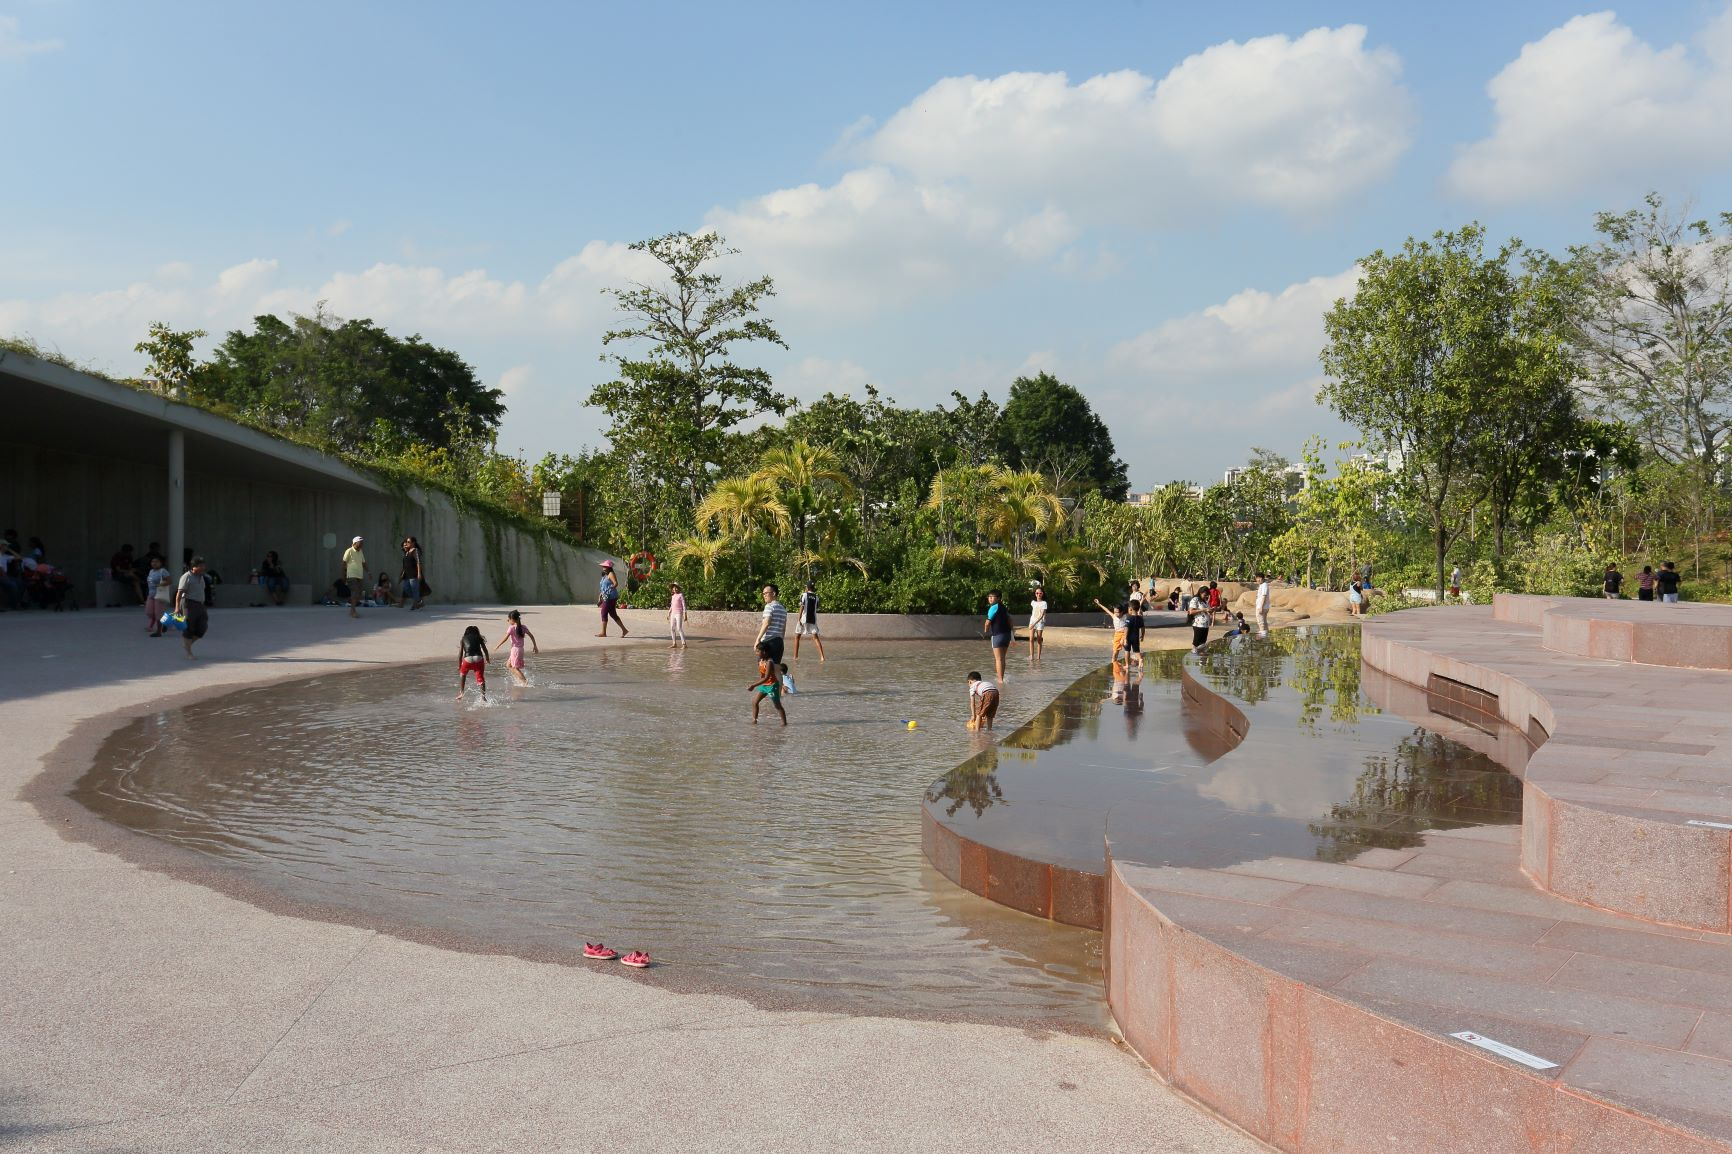 Children enjoying Clusia Cove's educational water playground, featuring tidal patterns, surface ripples, and a water recycling system.